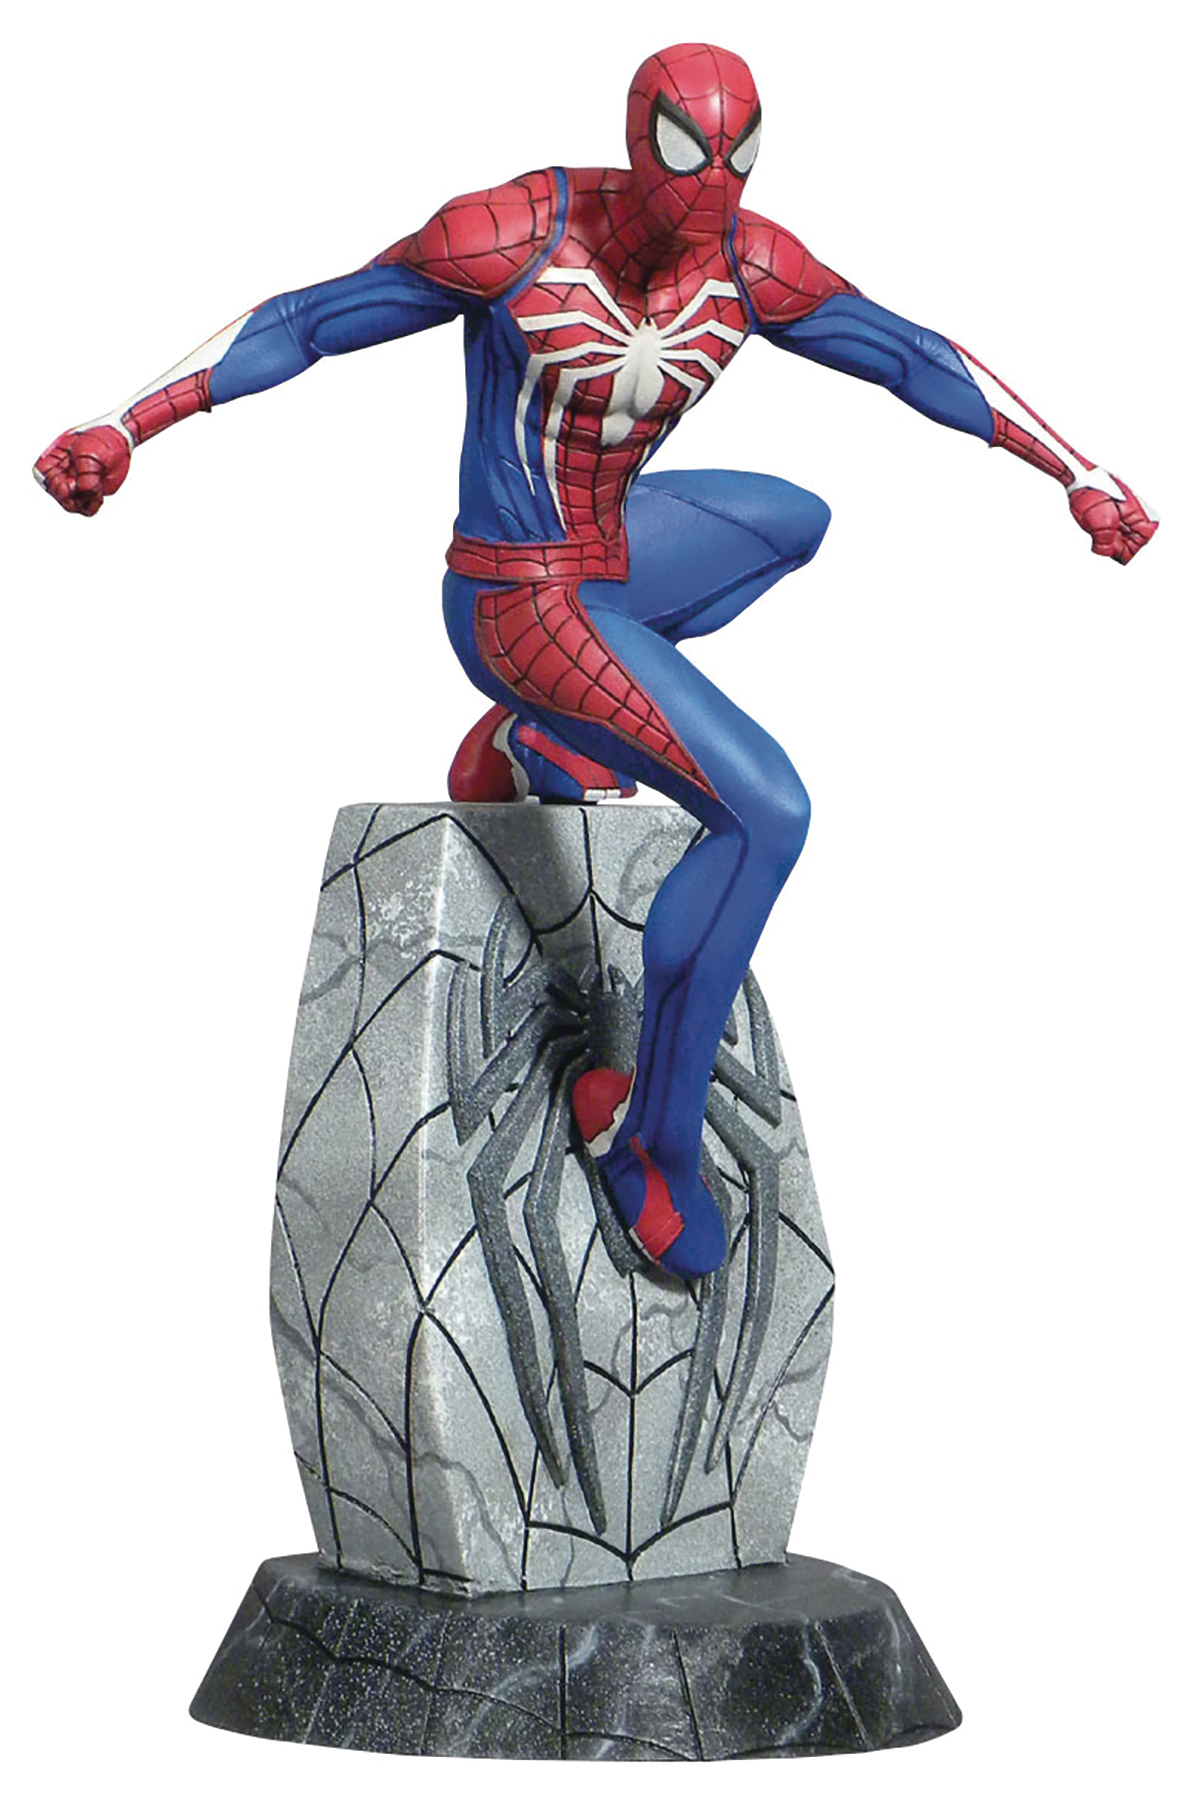 MARVEL GALLERY PS4 SPIDER-MAN PVC FIGURE